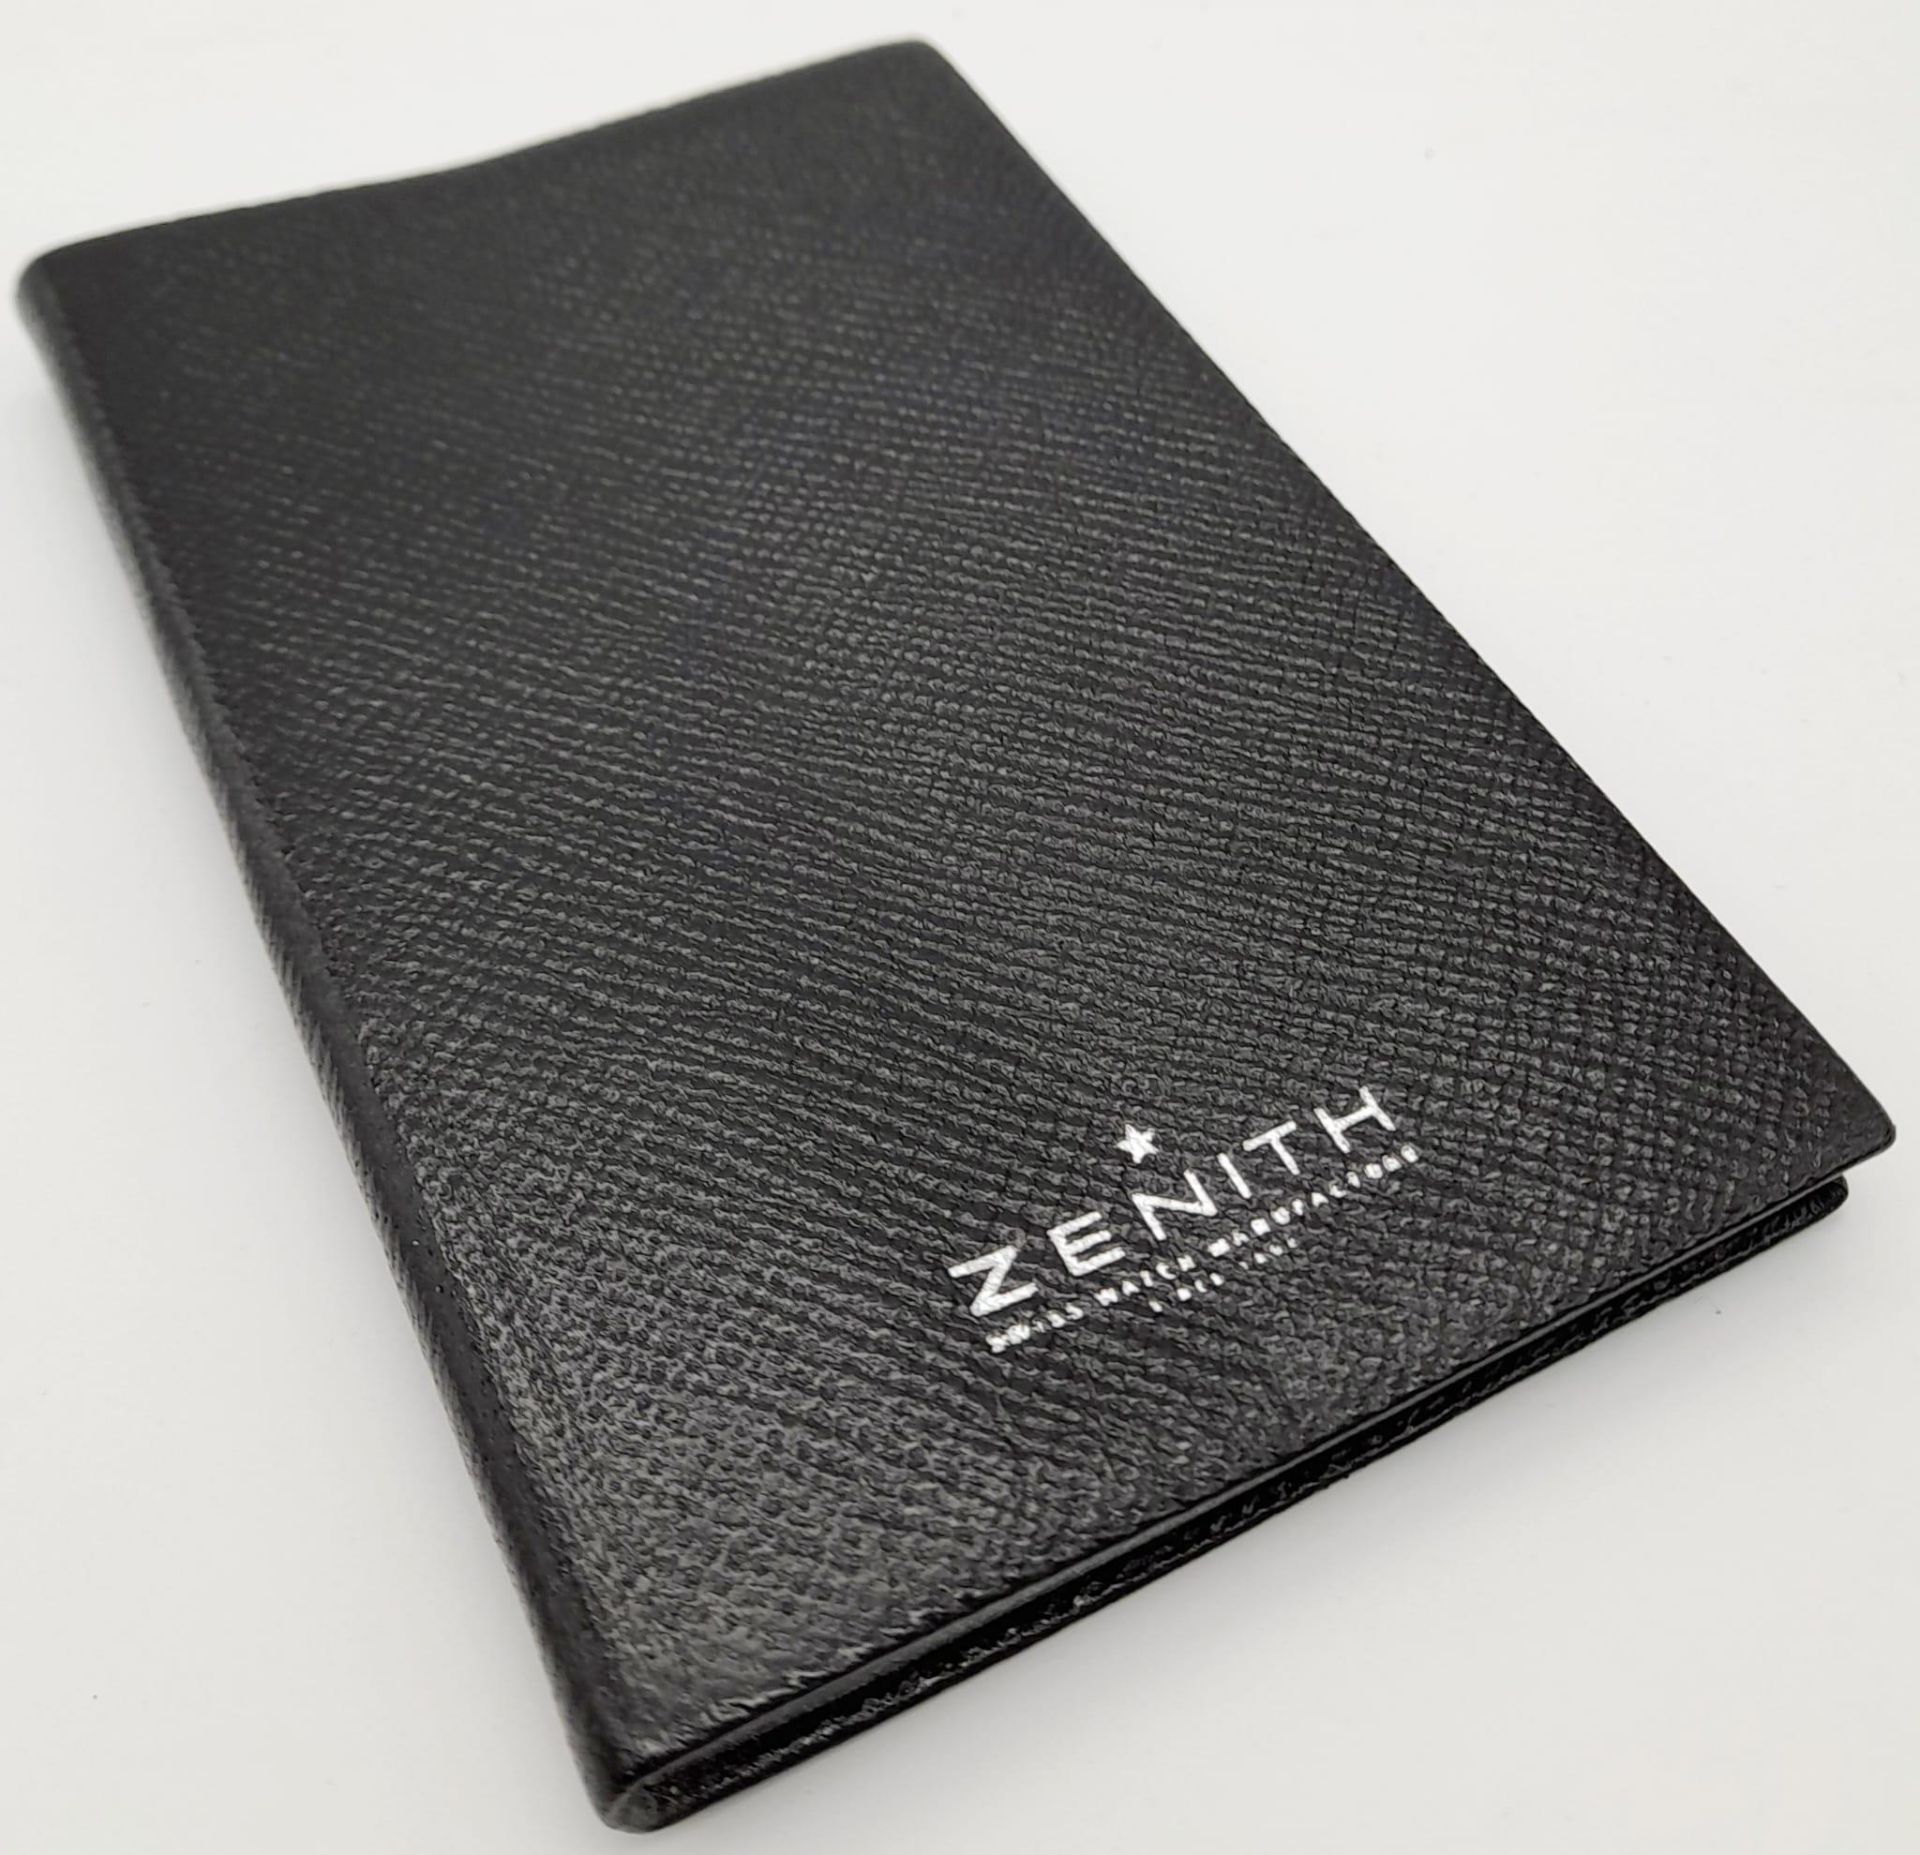 ZENITH WATCH COMPANY LEATHER NOTEBOOK MADE BY SMYTHSON OF BOND STREET LONDON - Image 2 of 4